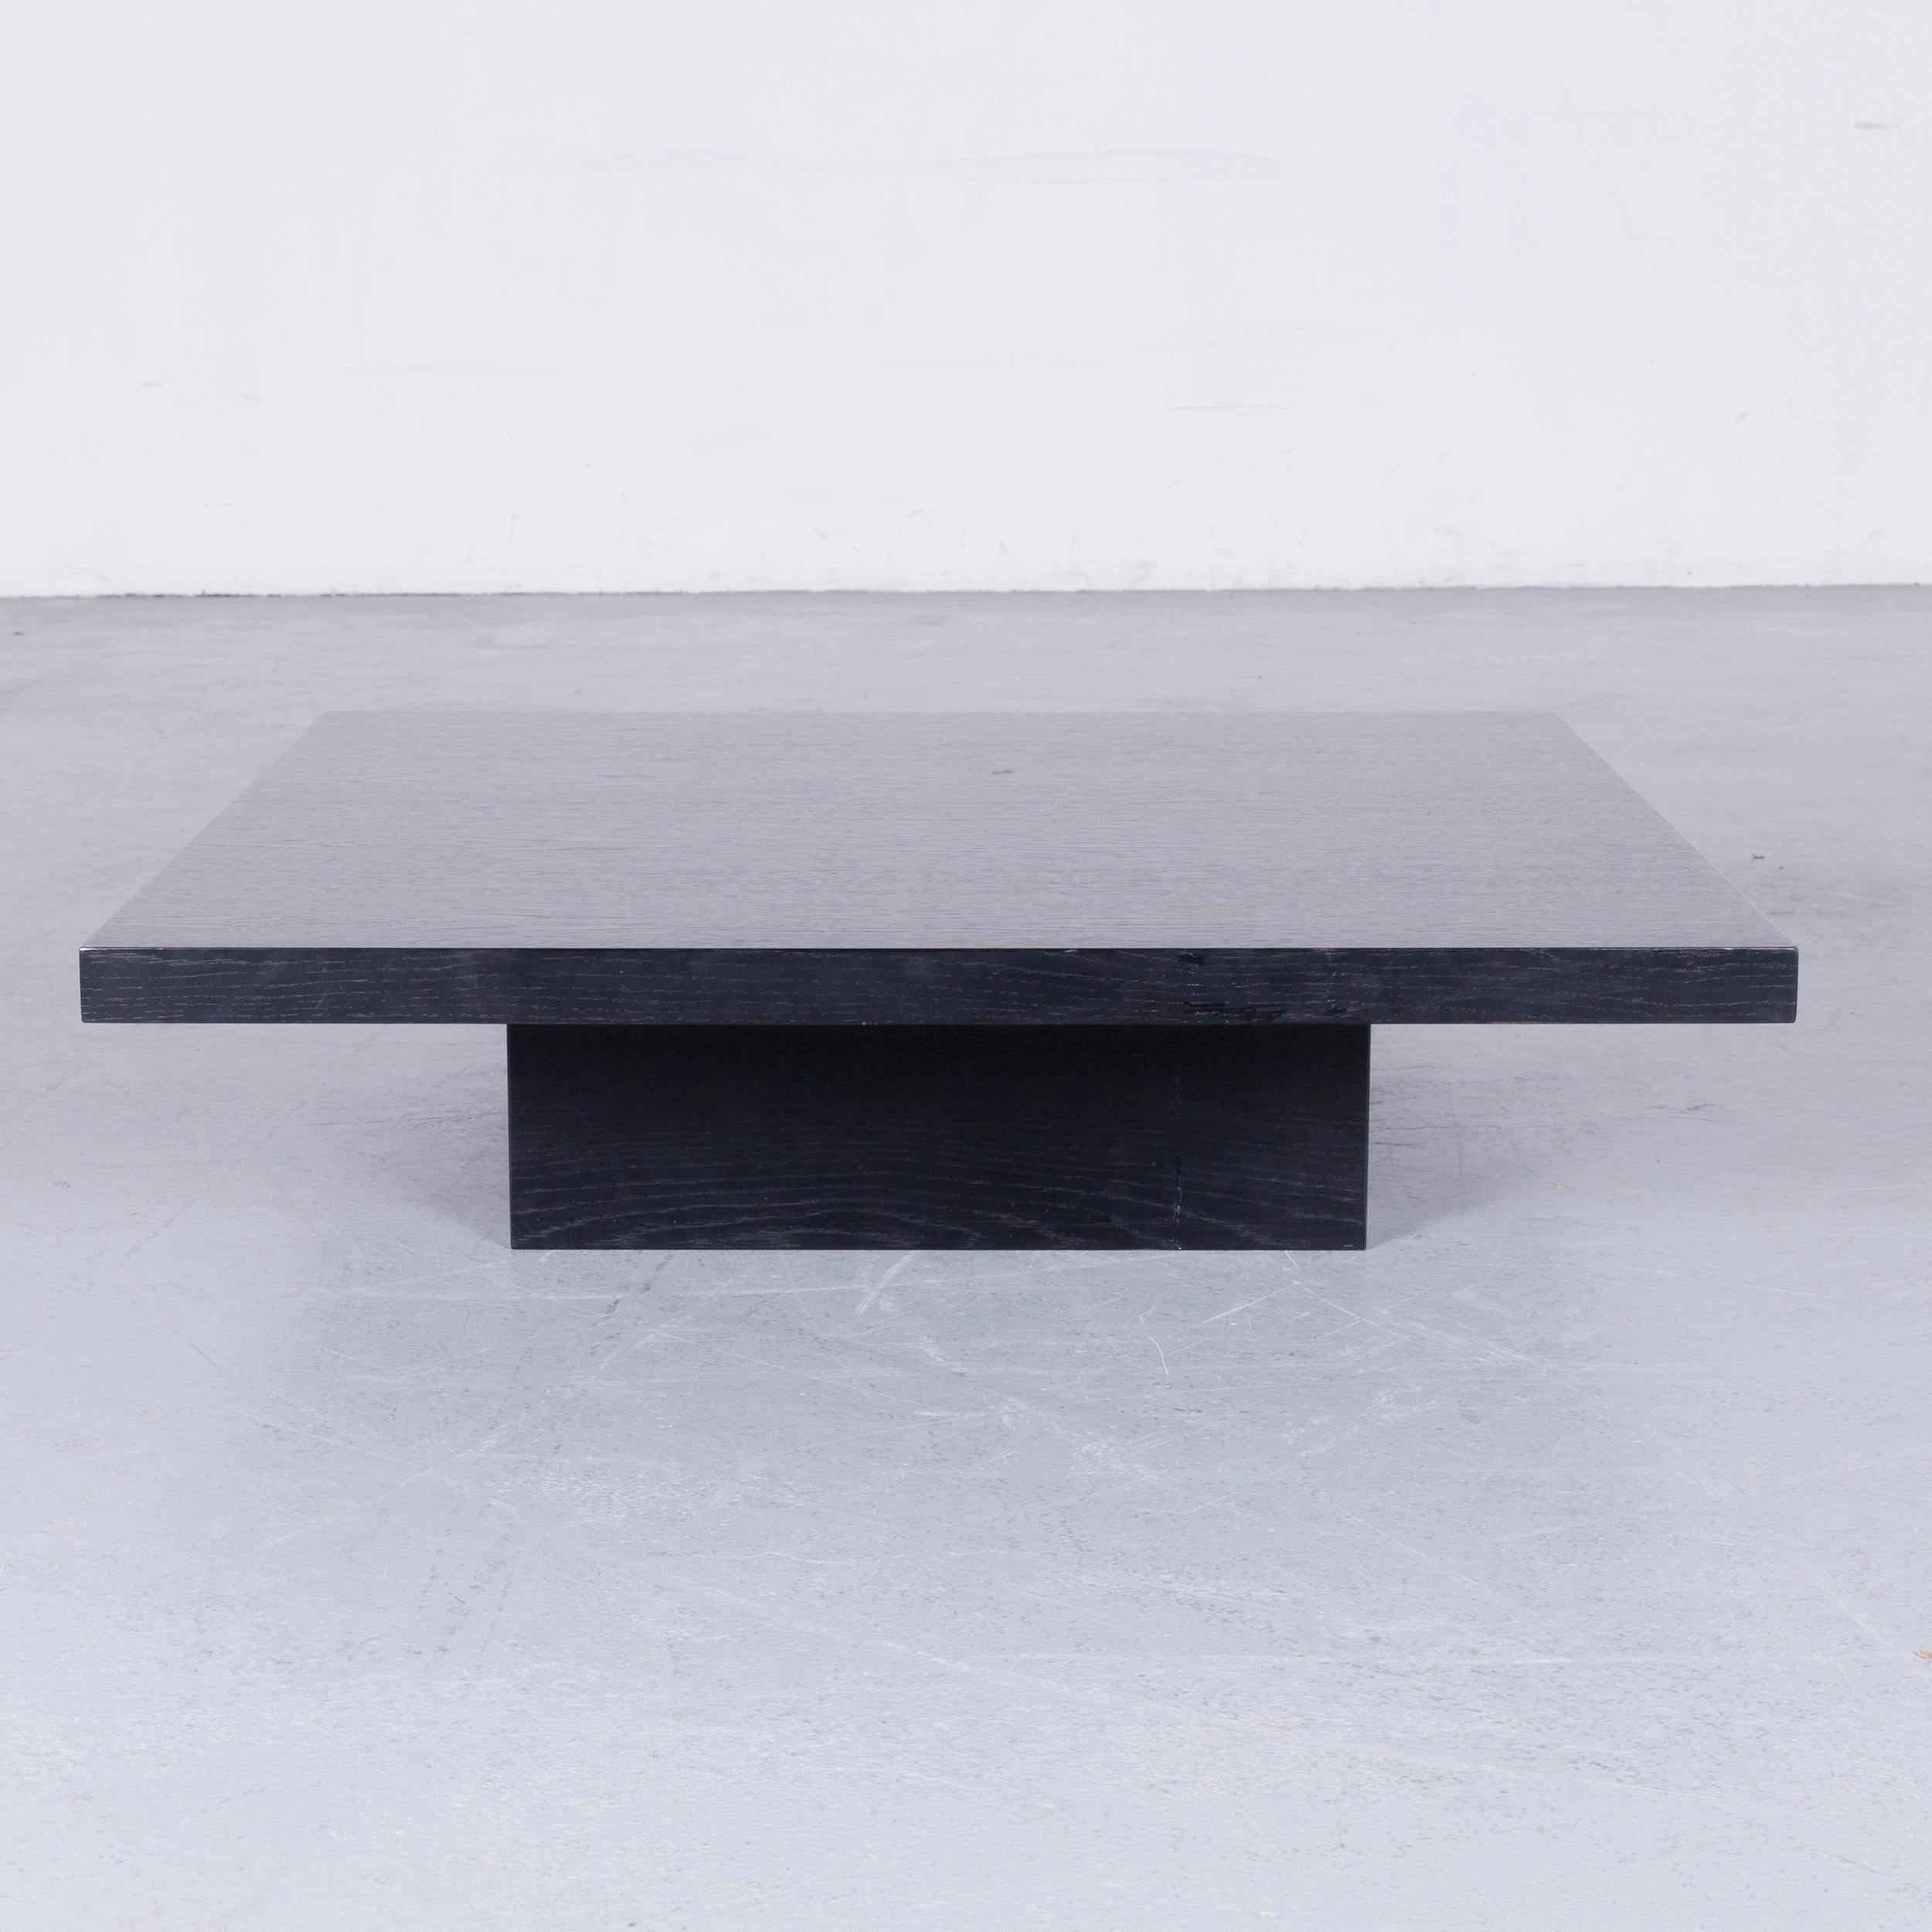 Black colored wooden designer sofa table, in a minimalistic and modern design, made for pure style.